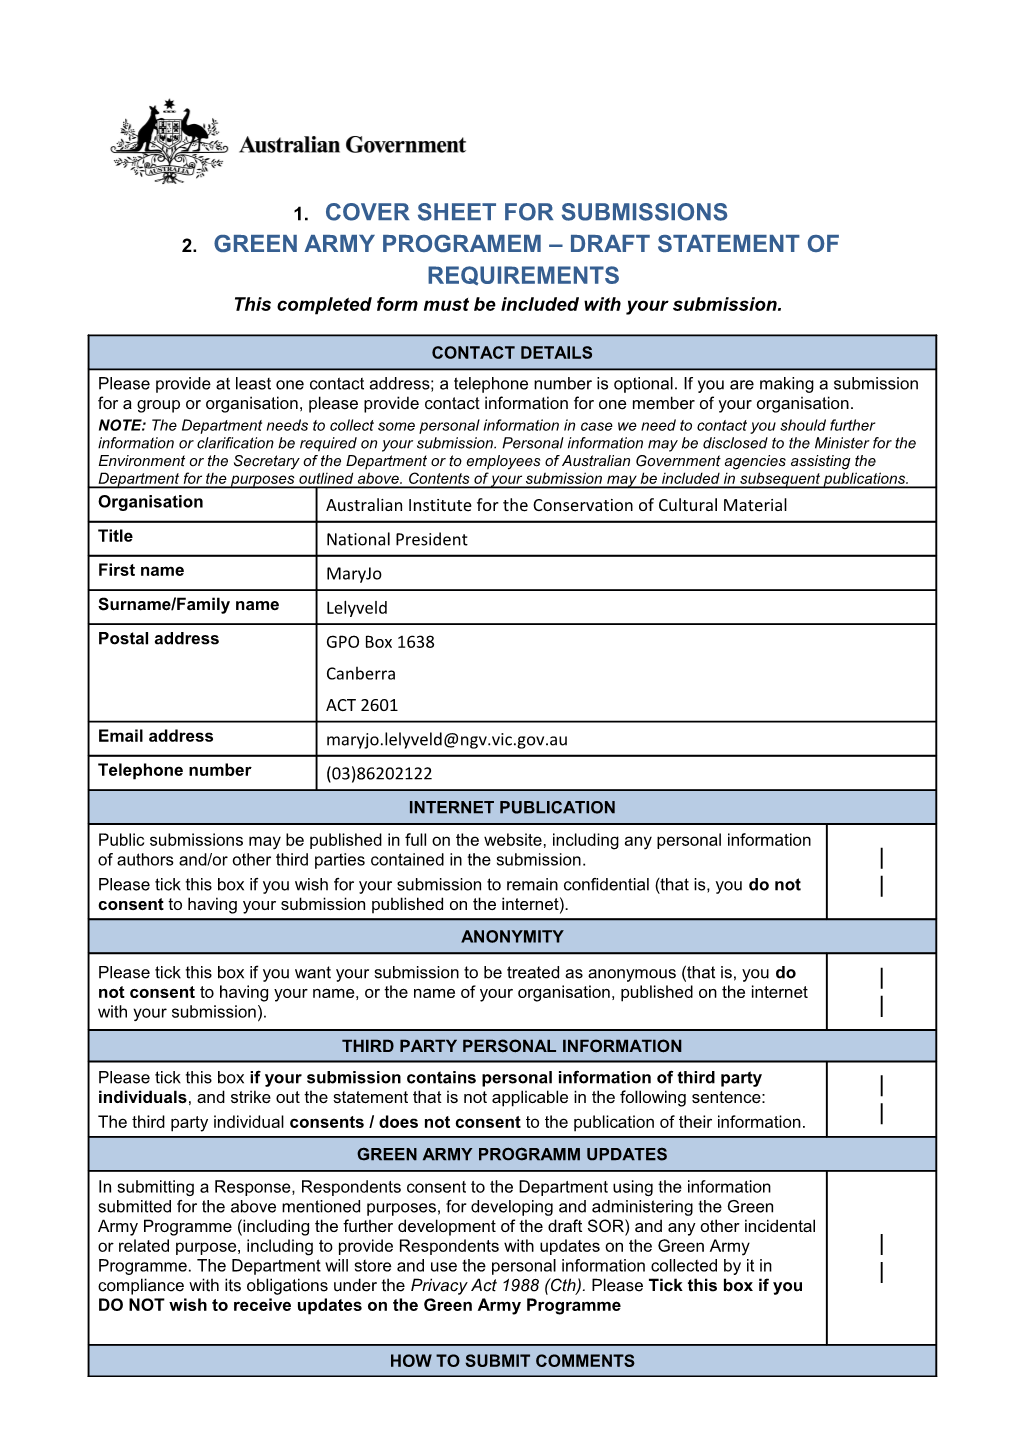 Coversheet for Submissions - Green Army